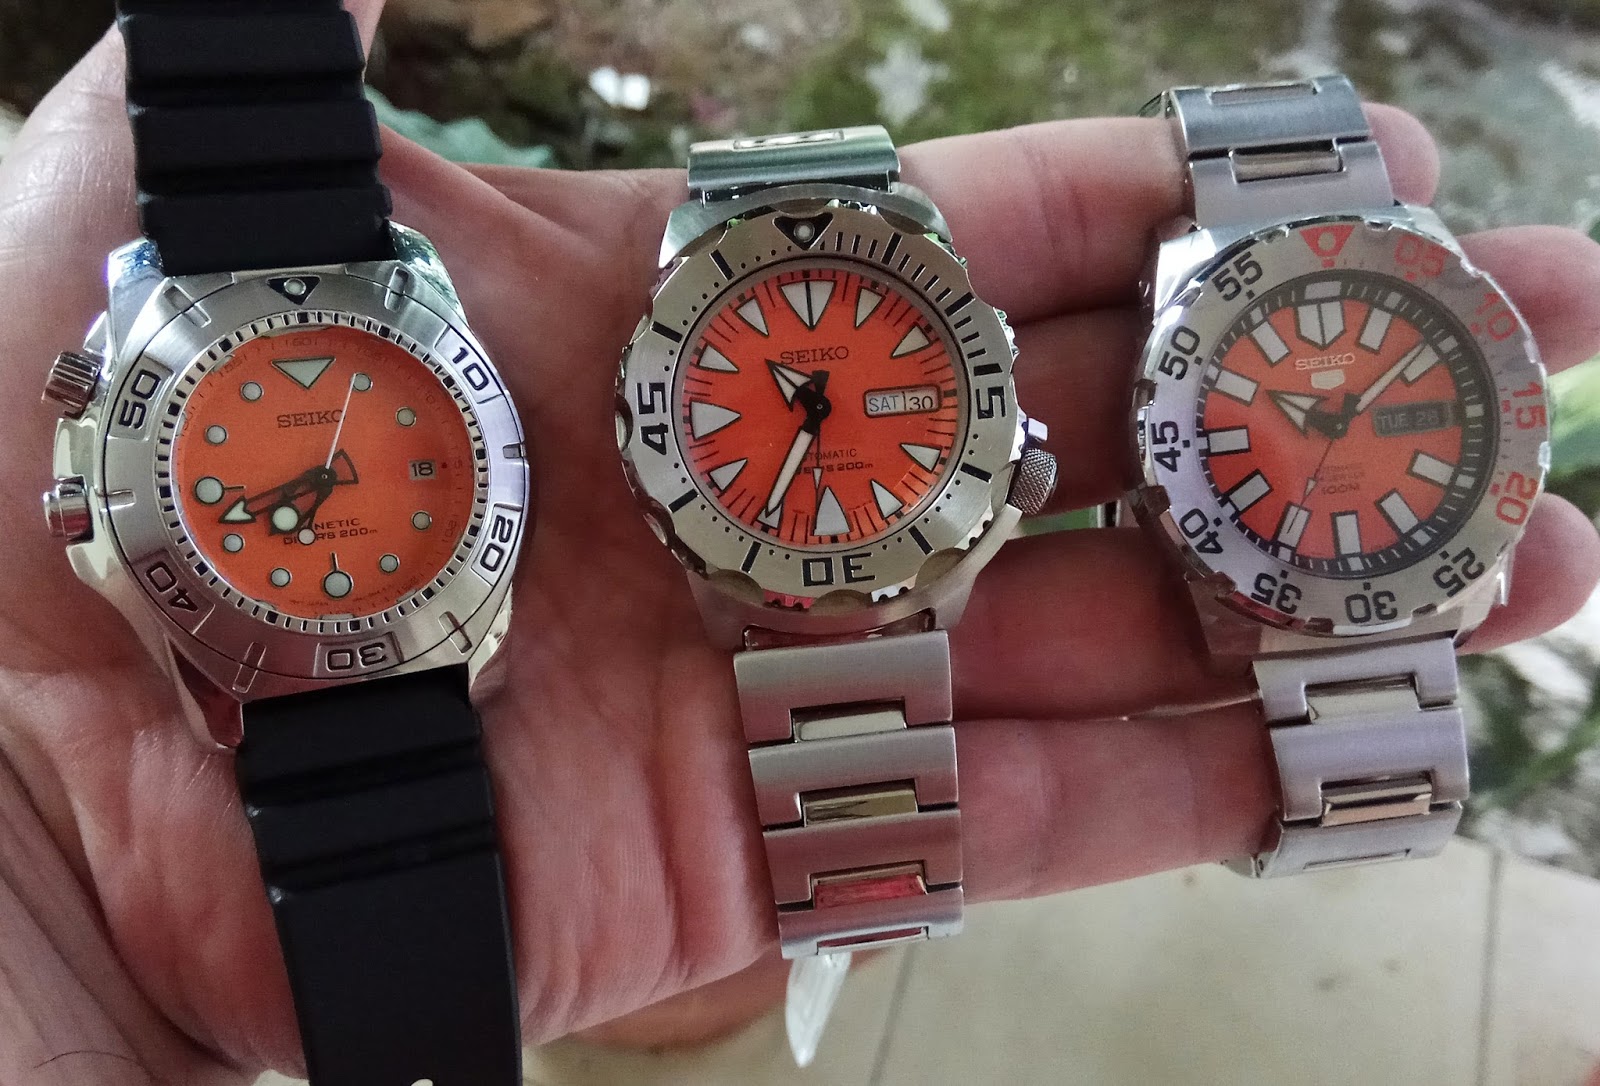 SKA291, SRP309 and SRP483...